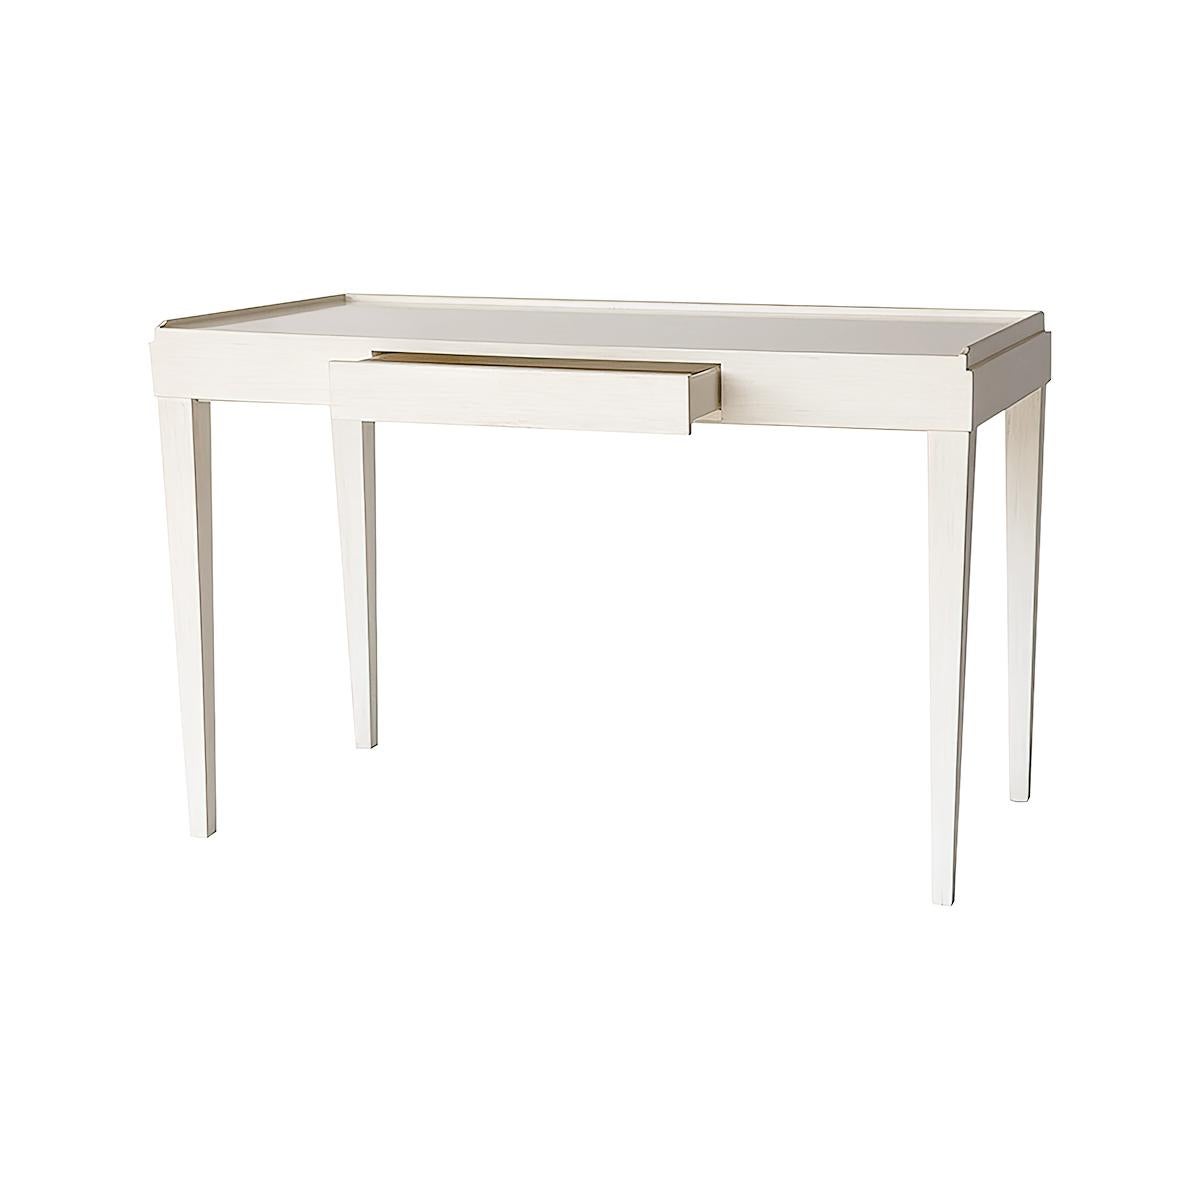 Mid-Century Modern style desk with a three-quarter wooden gallery, a single frieze drawer, and raised on square tapered legs. Finished in our custom drift white lacquer.

Dimensions: 48